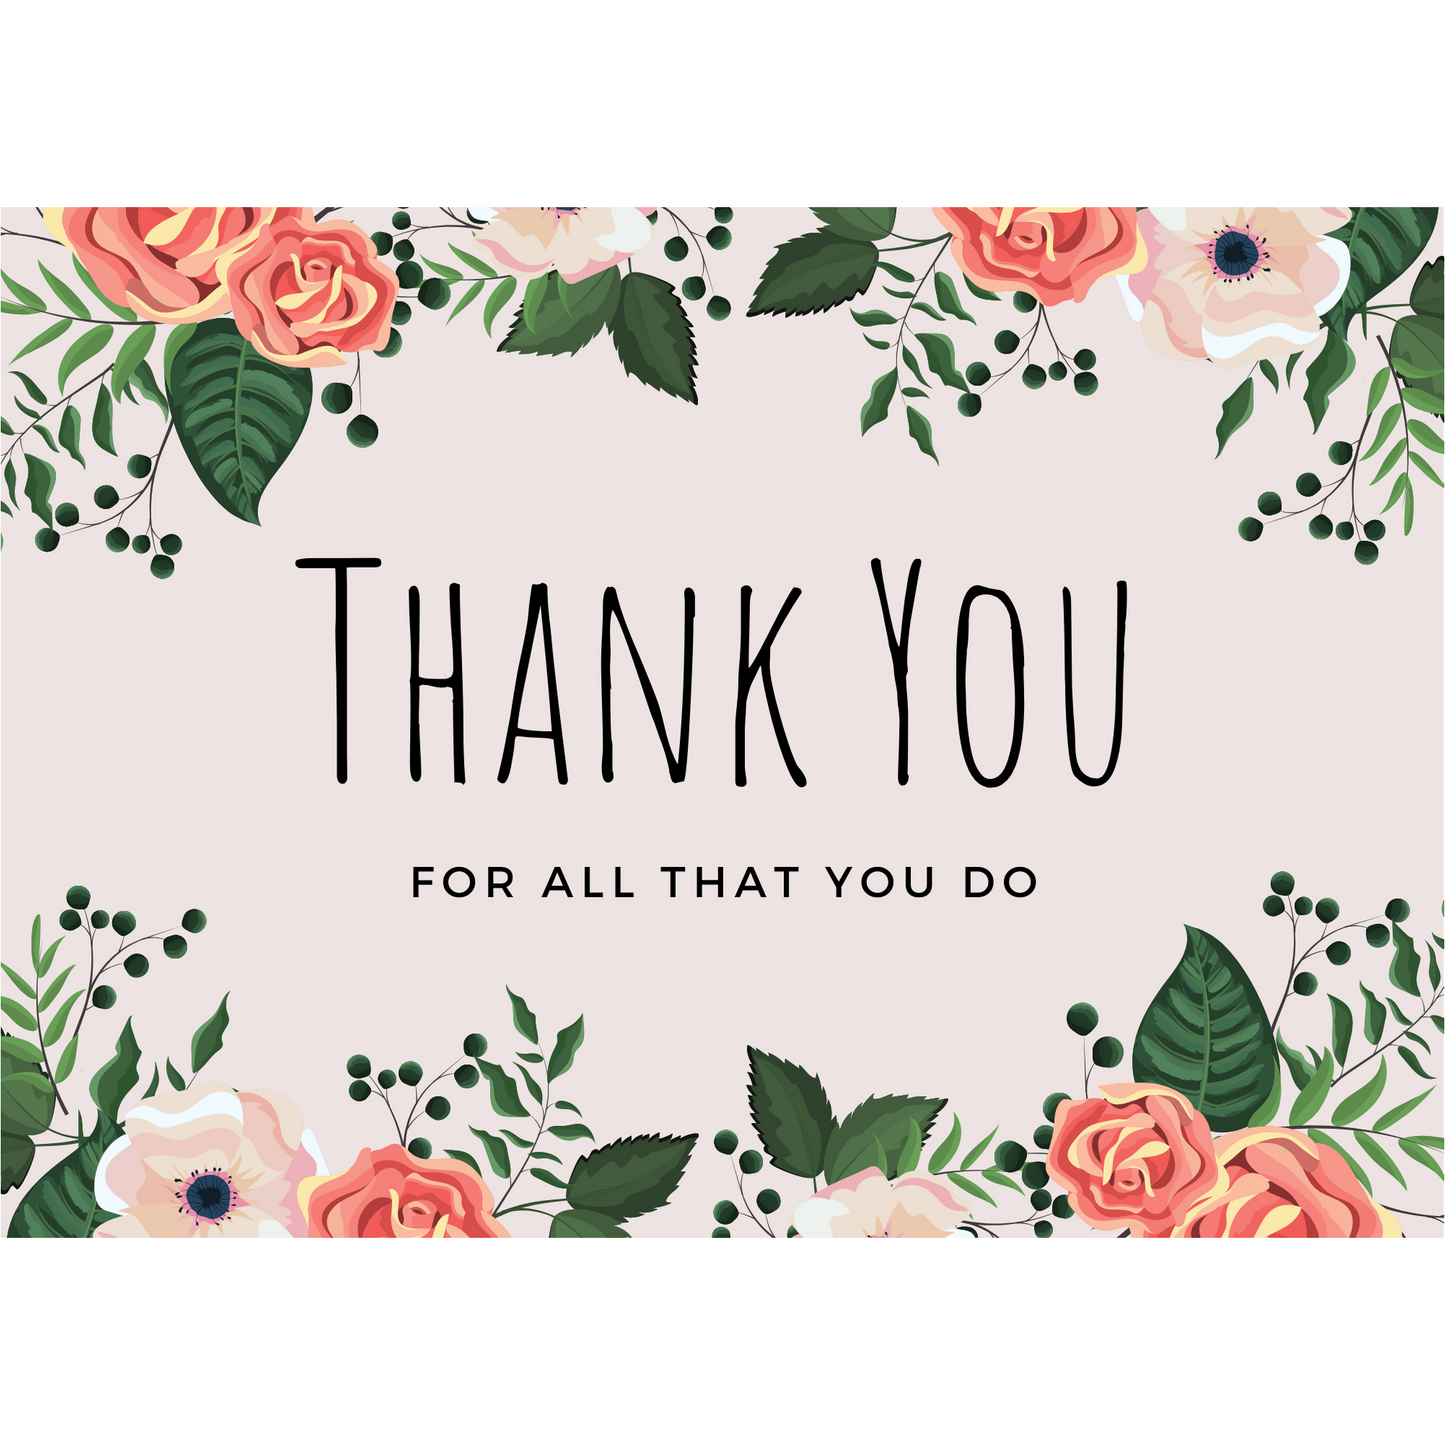 Thank you - floral